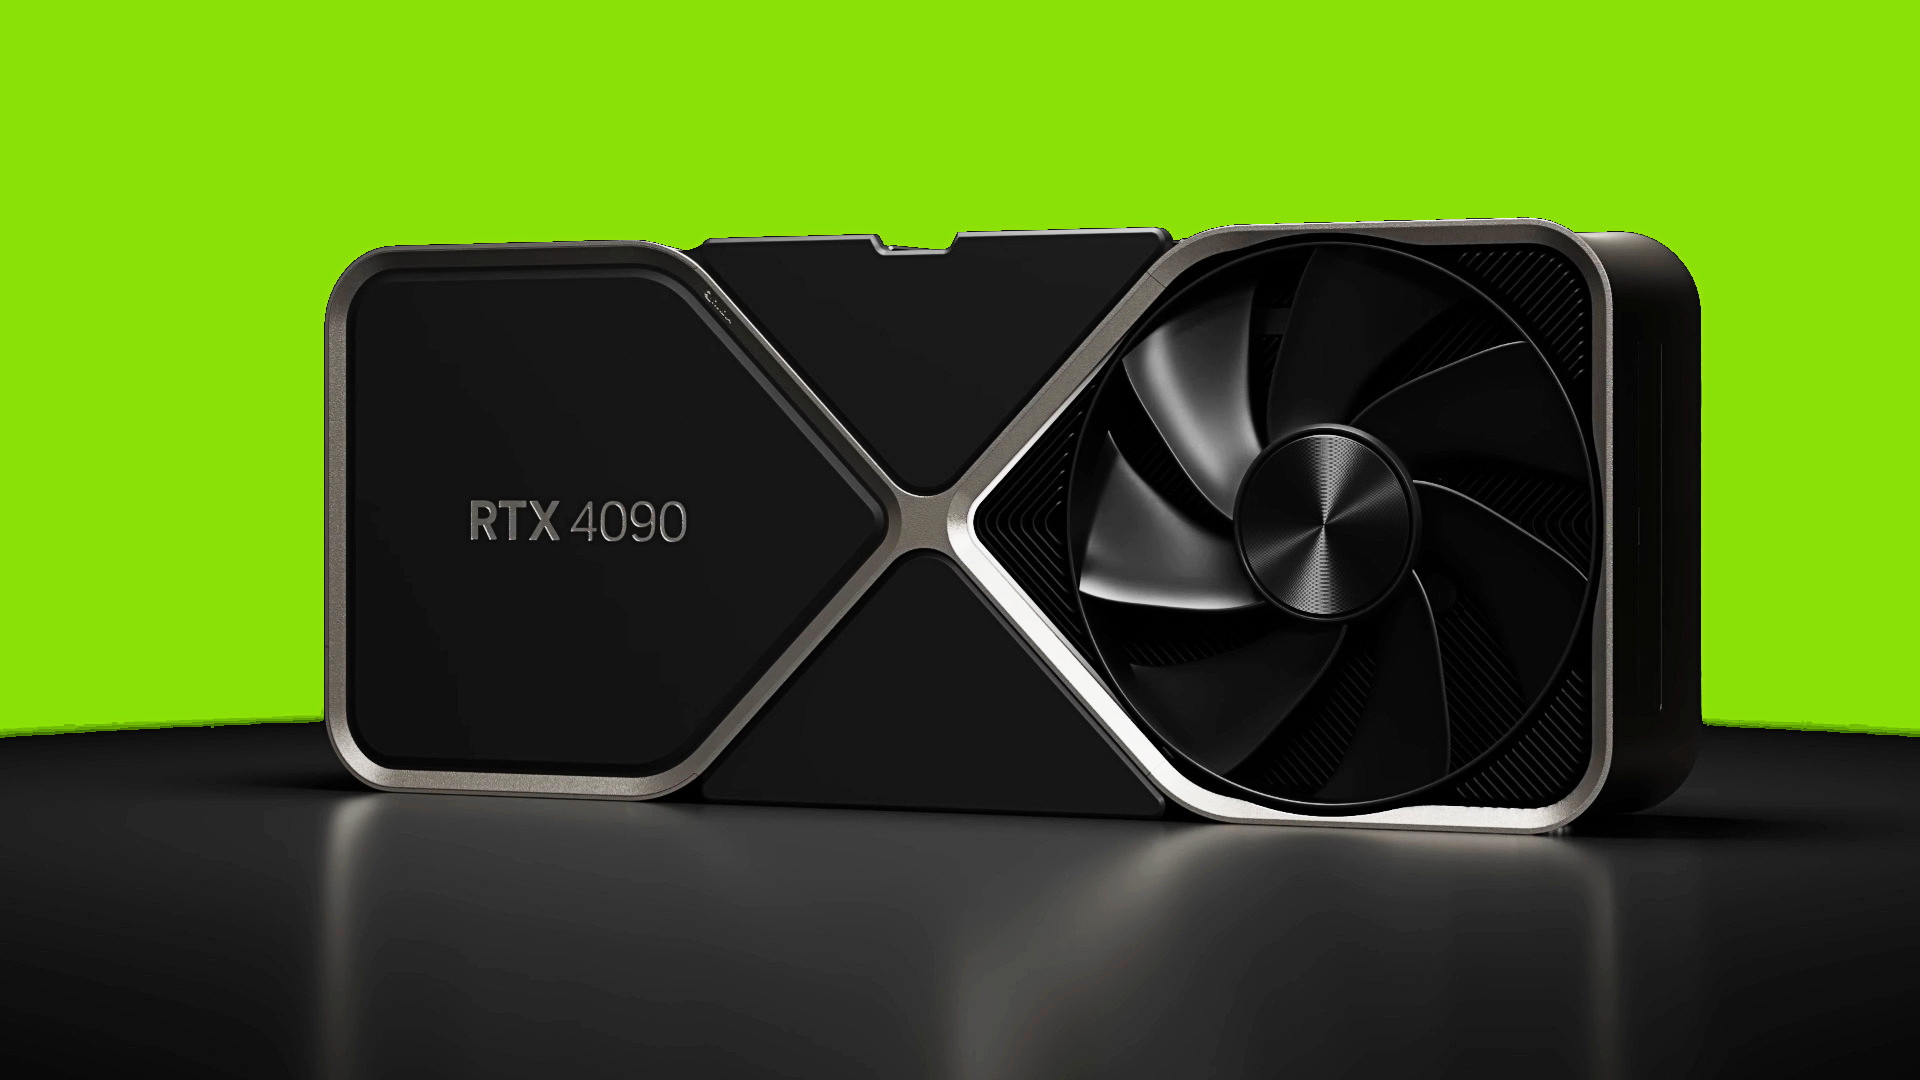 Nvidia DLSS 3.0 may not require an RTX 4000 GPU after all